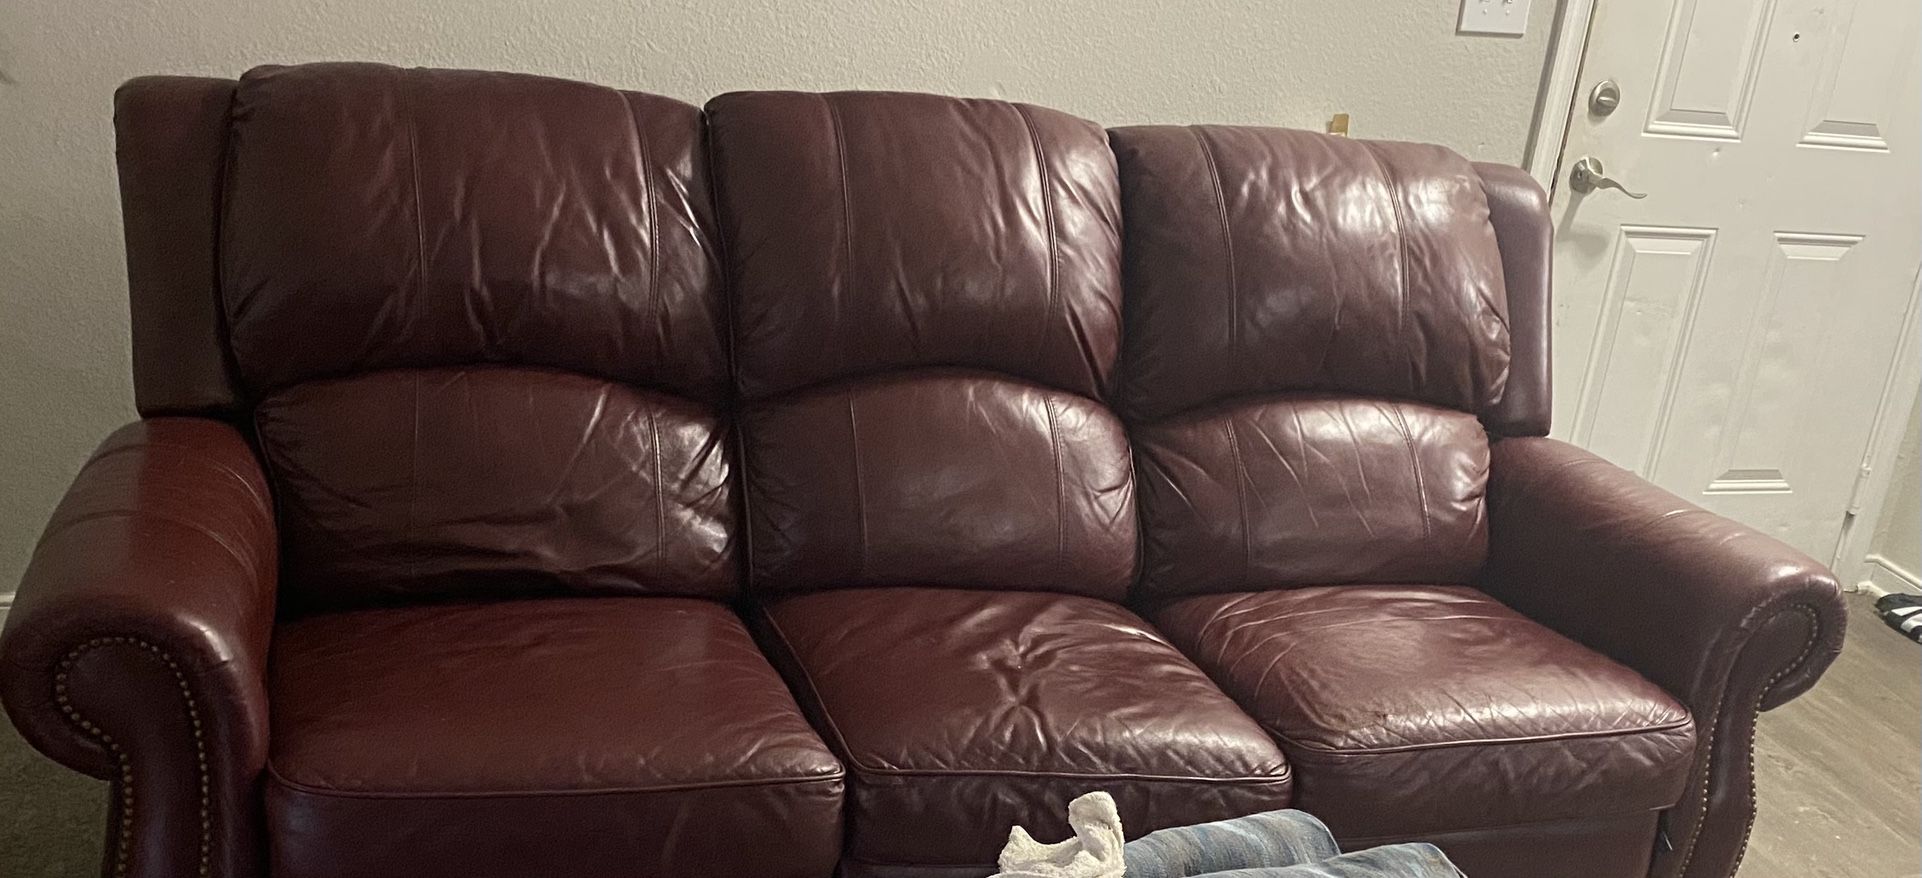 Leather Recline Couch One Side Messed Up